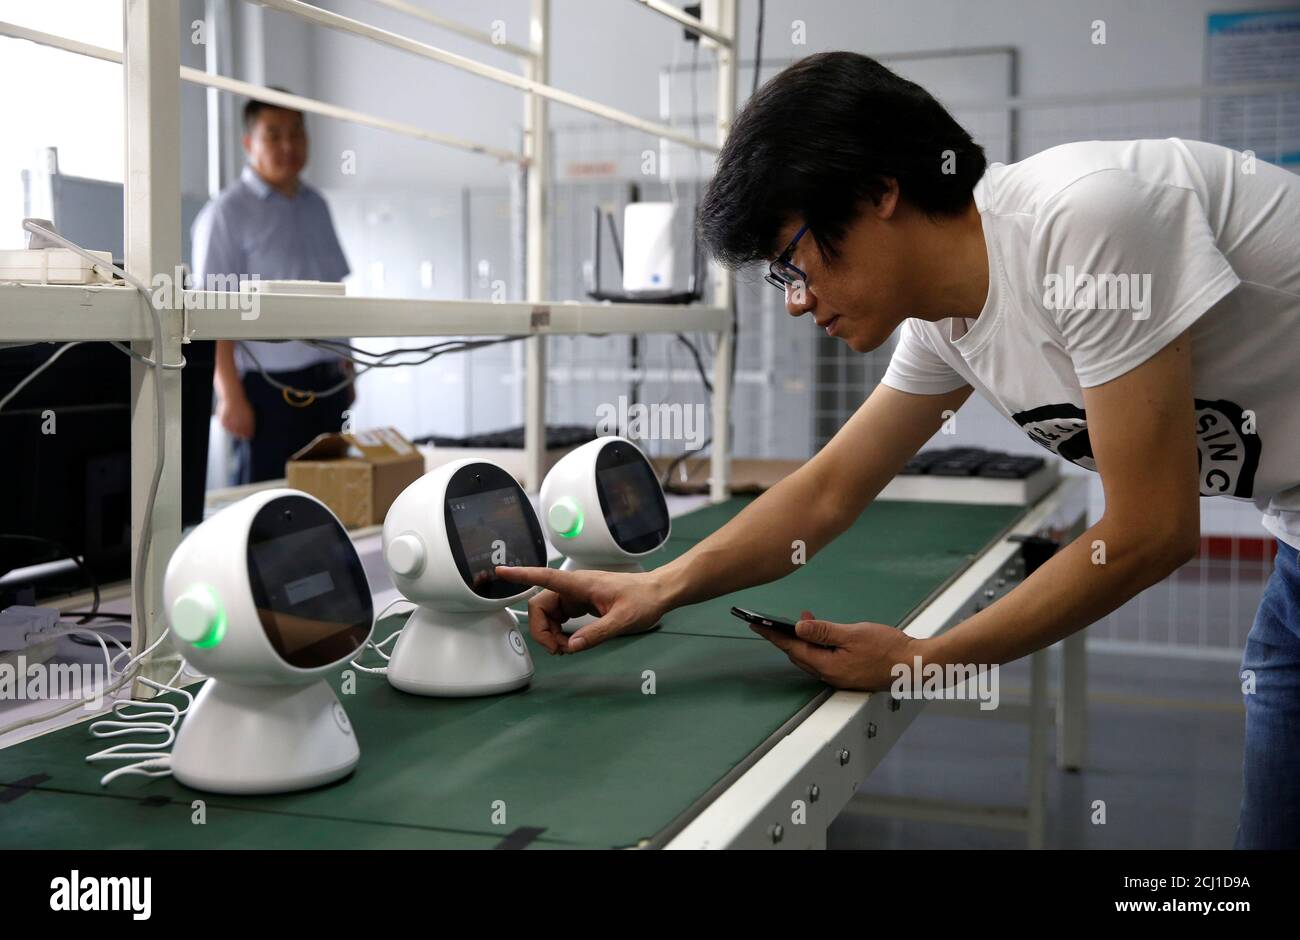 An engineer tests a "Xiaoyi" robot, a Siri-like voice assistant, which  links the user to Lanchuang's intelligent elderly care system, at the  headquarters of Lanchuang Network Technology Corp in Weifang, Shandong  province,